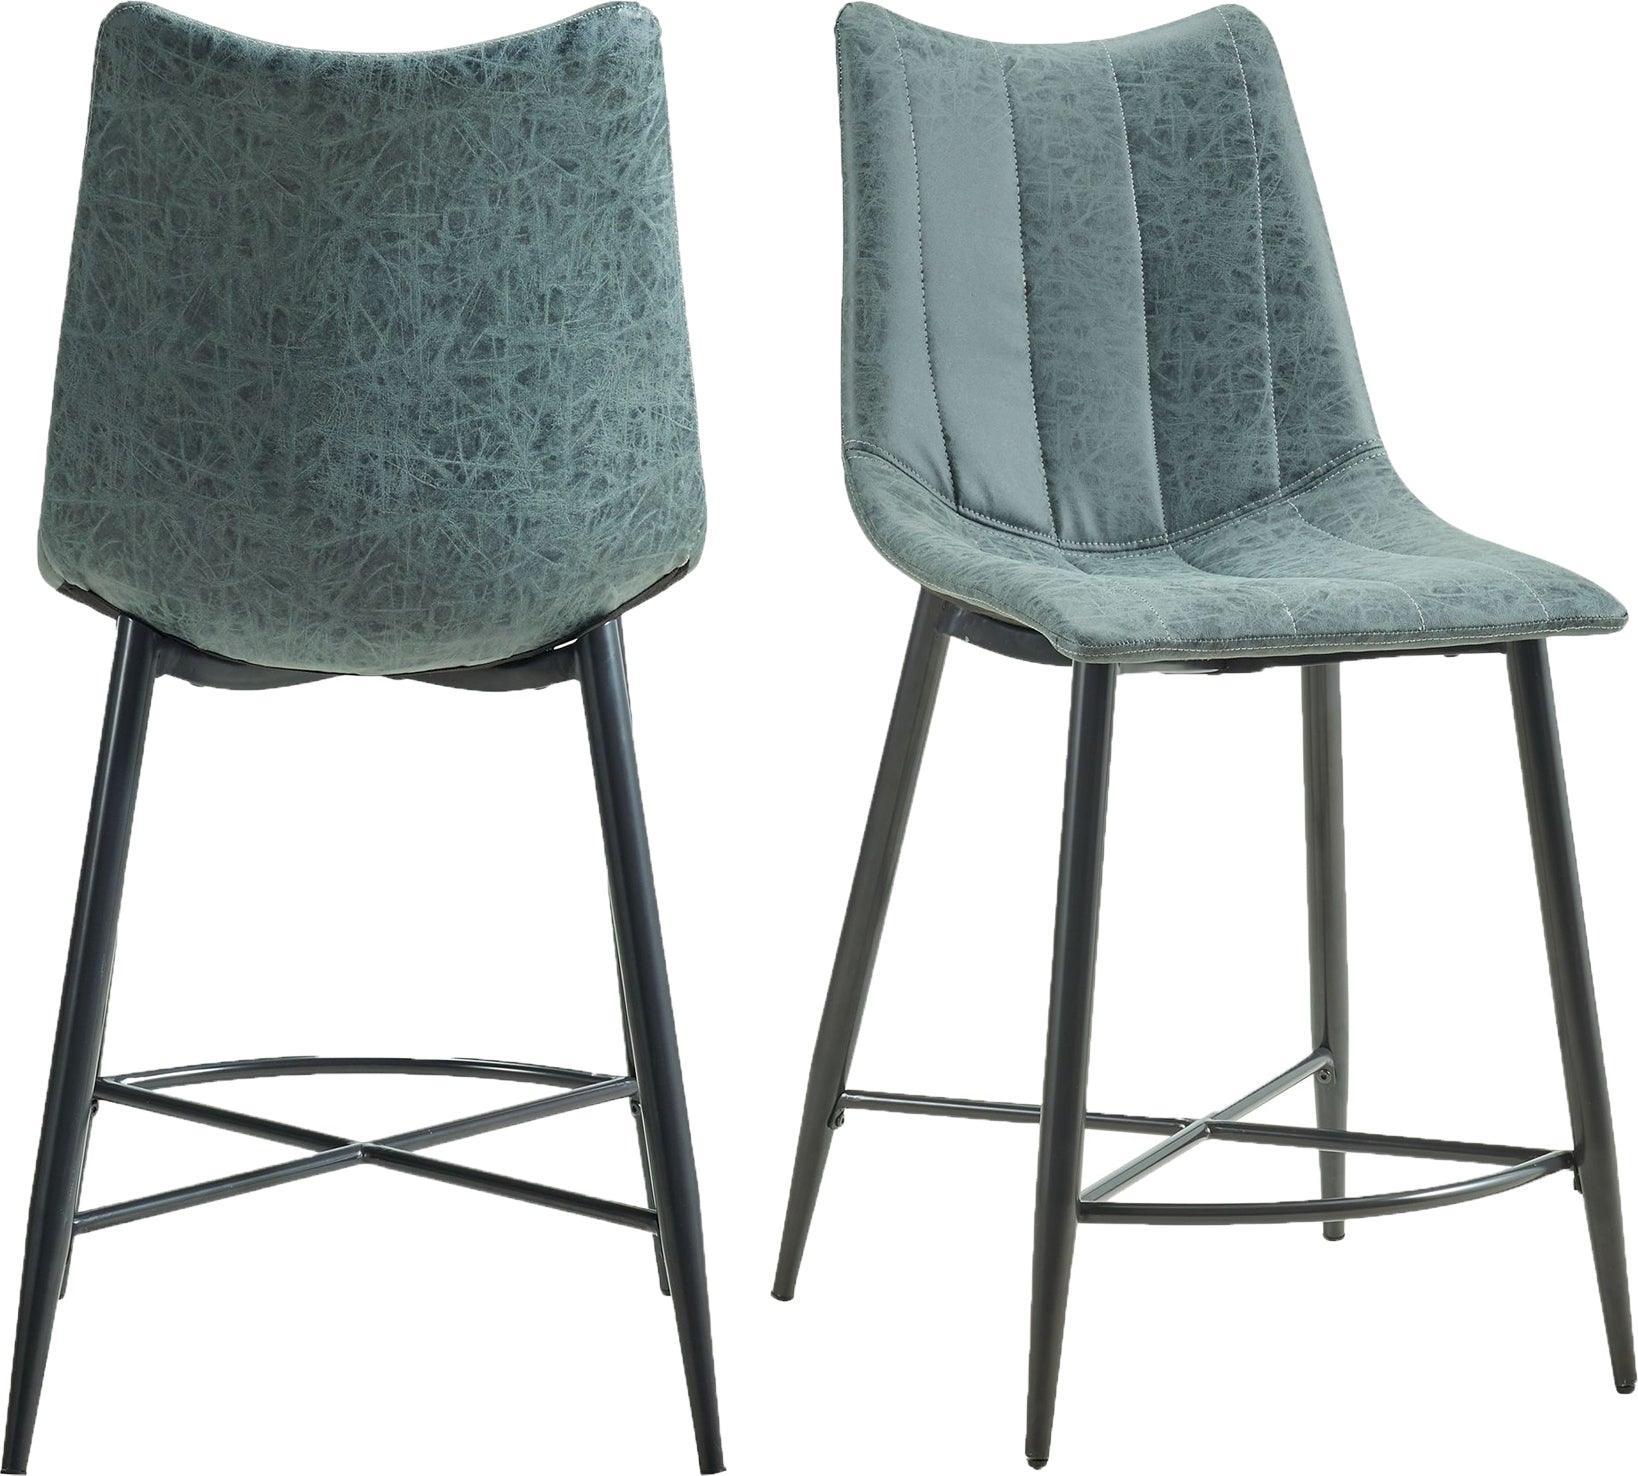 Elements Barstools - Conner Counter Height Side Chair Set (Set of 2)